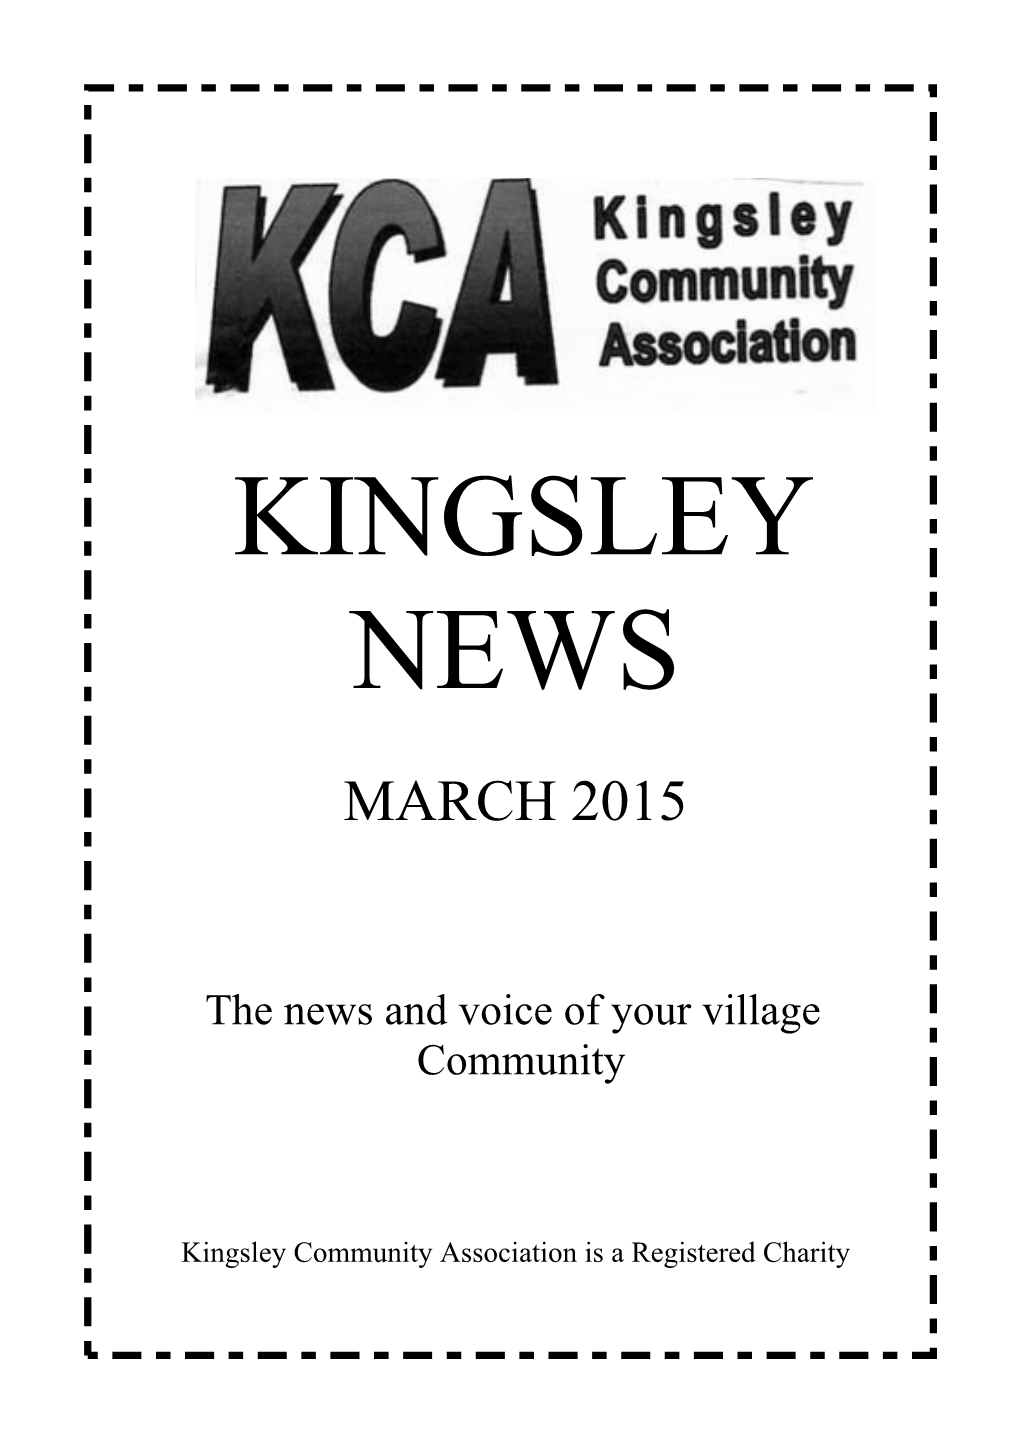 Kingsley News March 2015